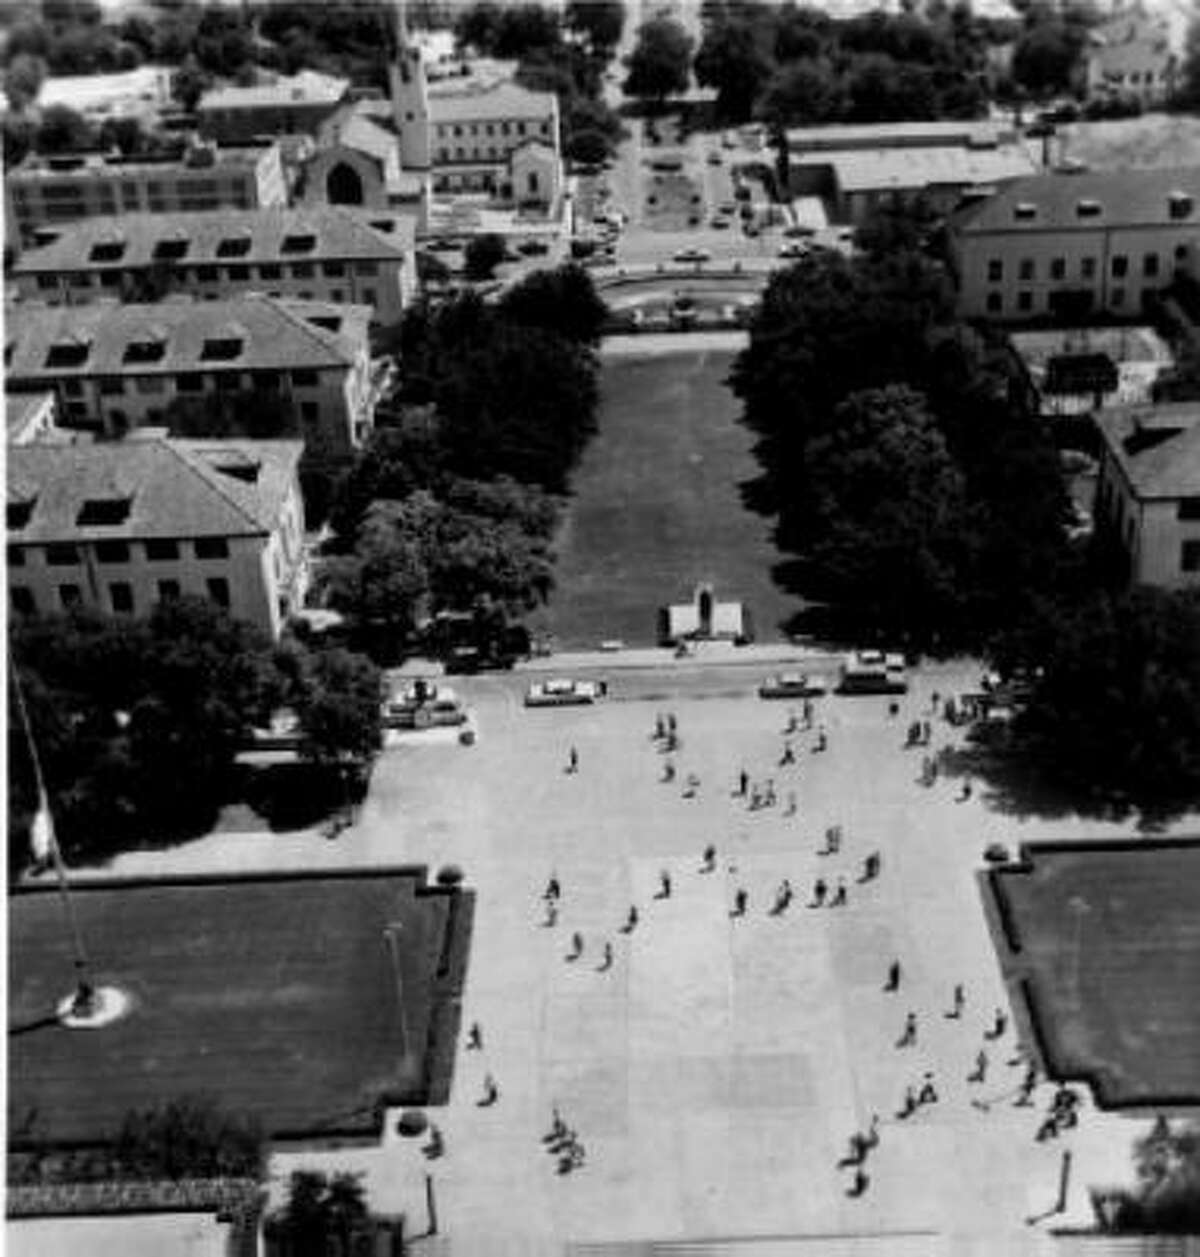 Aug. 1, 1966, on the University of Texas campus.